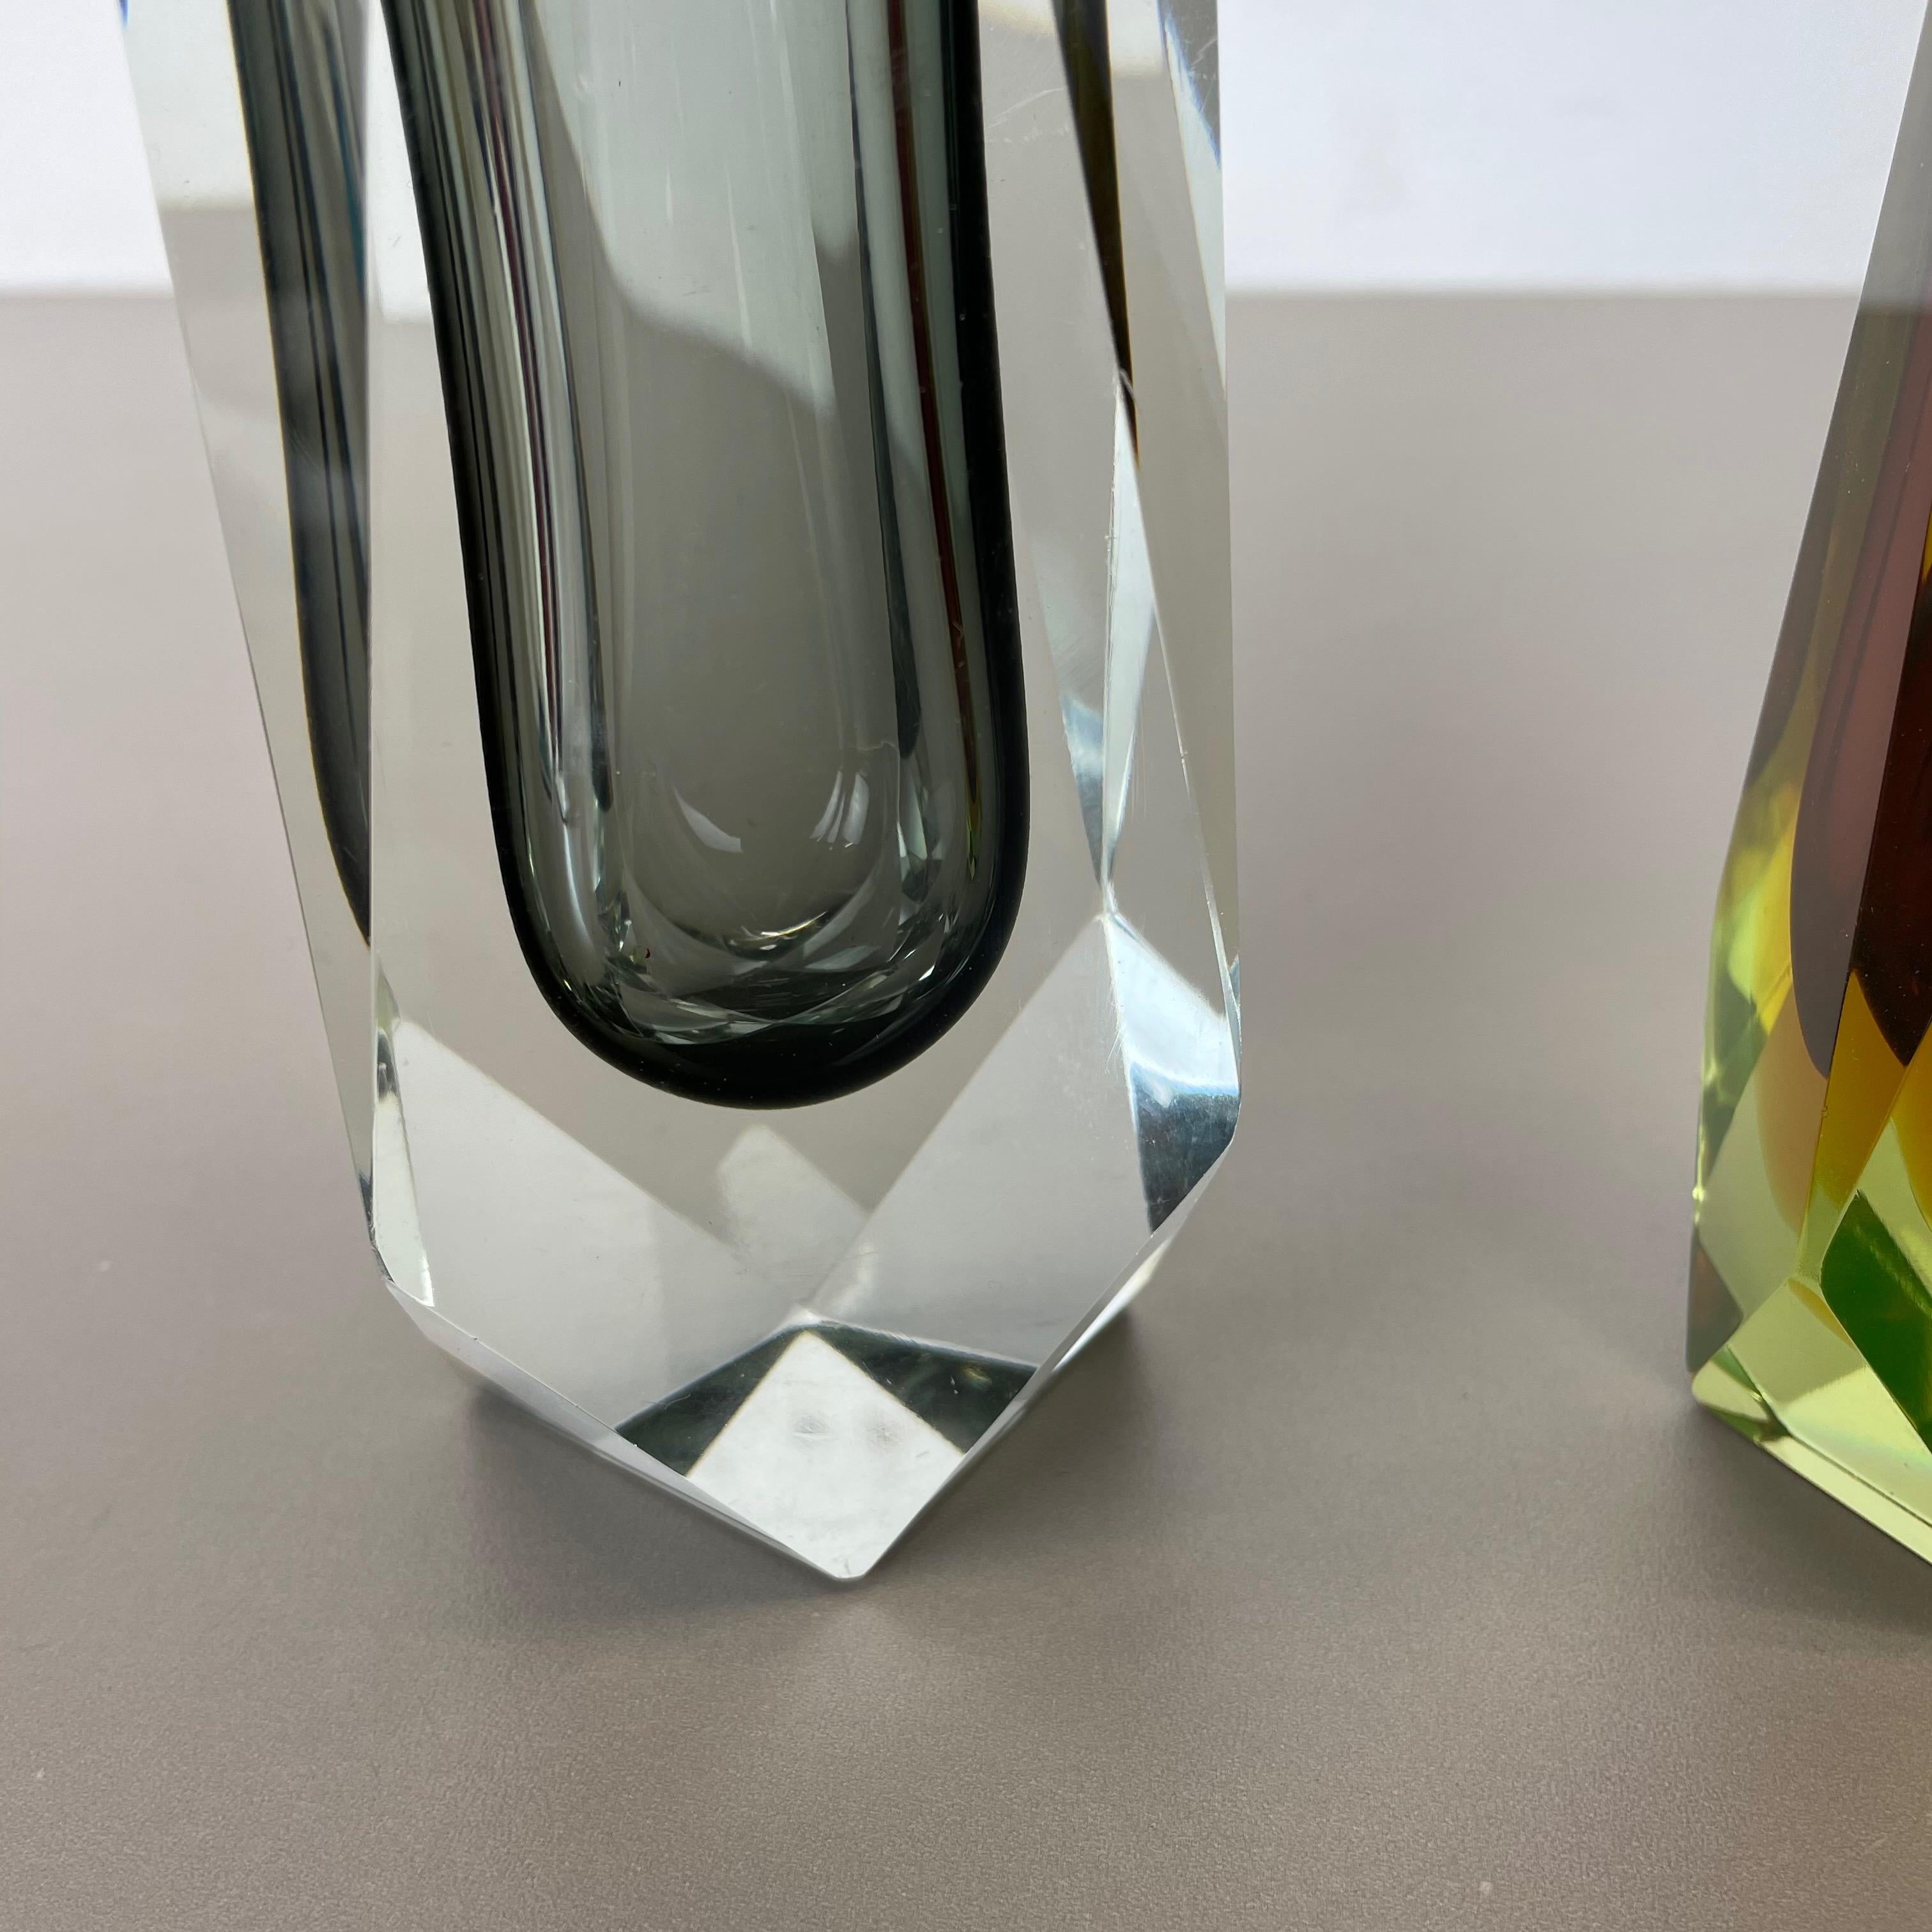 Rare Set of 2 Faceted Murano Glass Sommerso Vases, Italy, 1970s For Sale 5